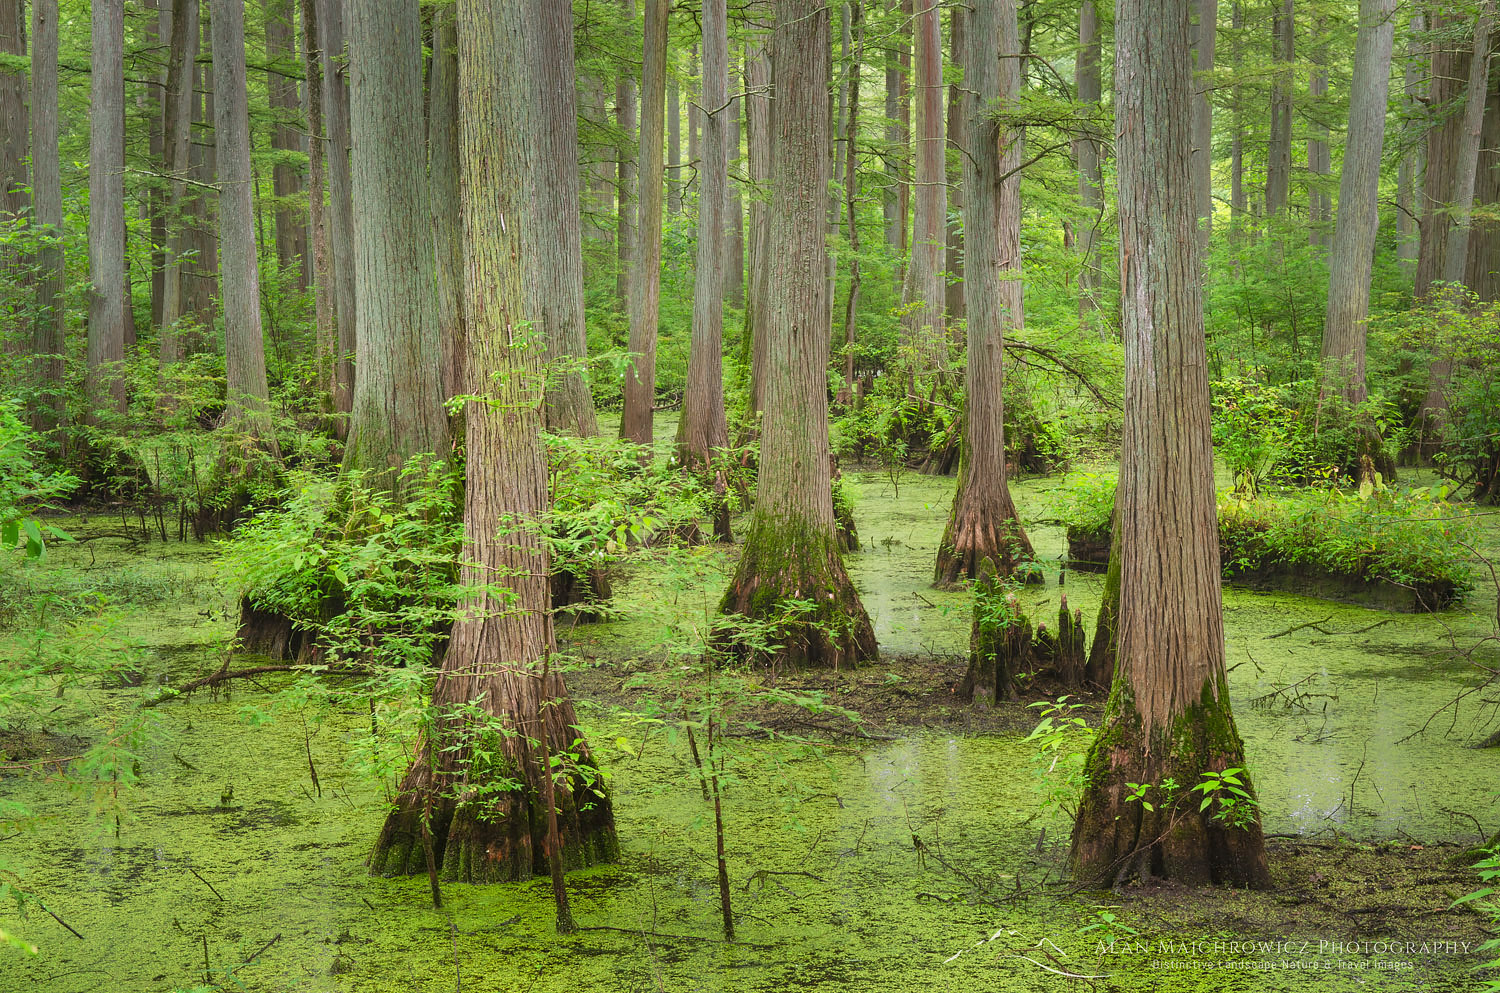 Cypress trees in Heron Pond, Cache River State Natural Area Illinois #63103